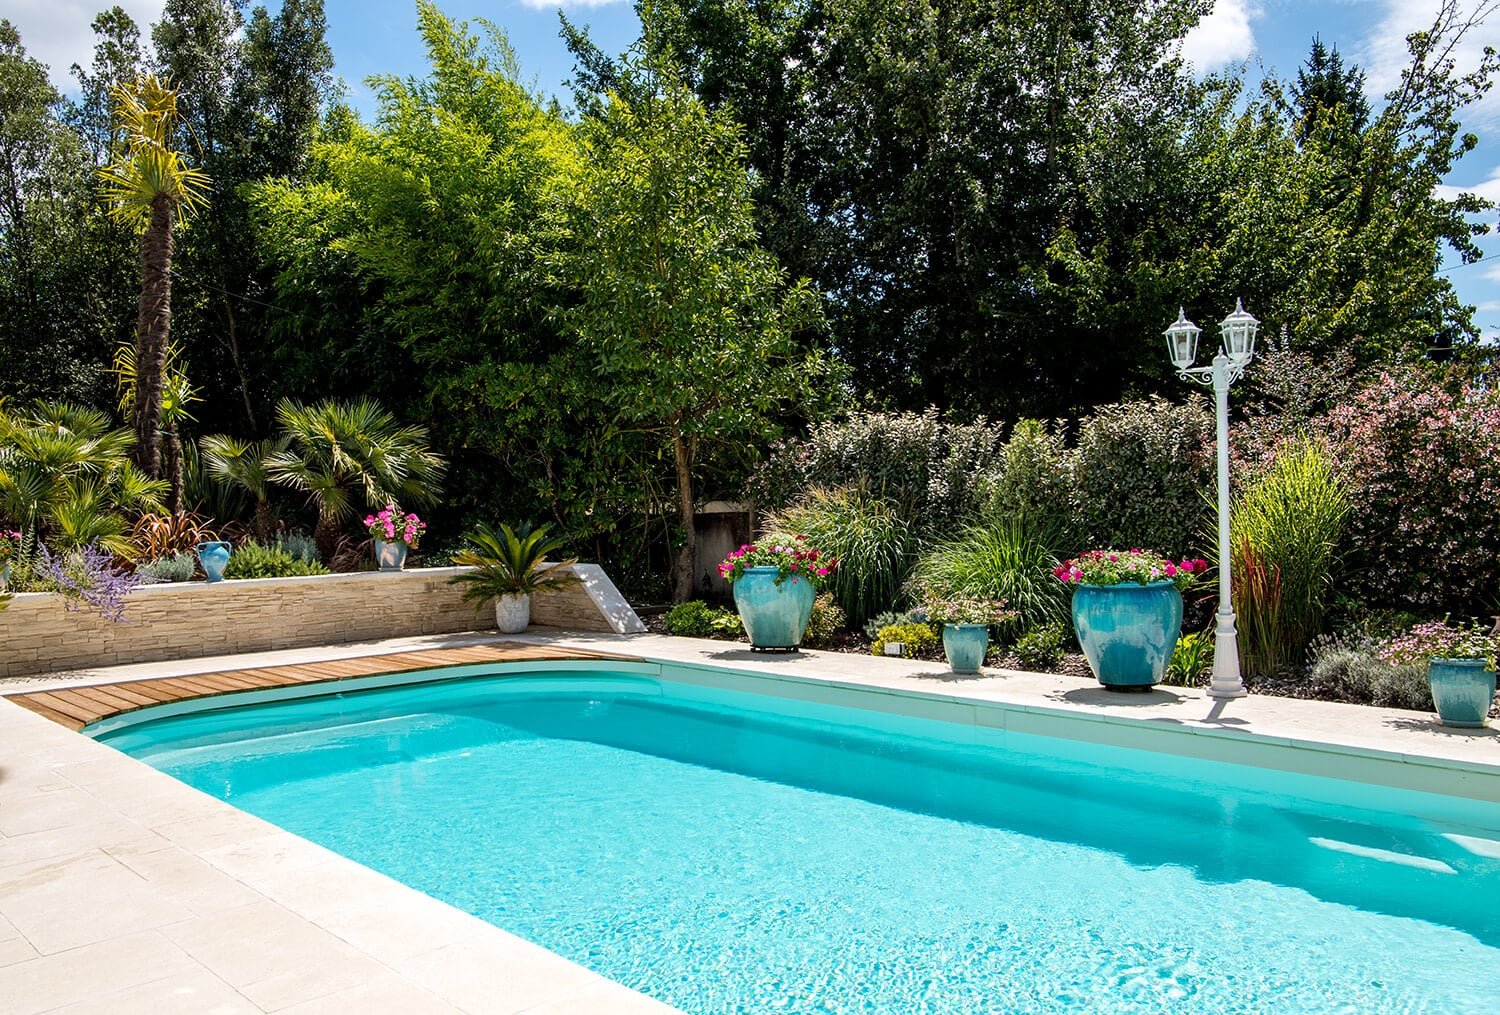 When is the right time of year to build a swimming pool?